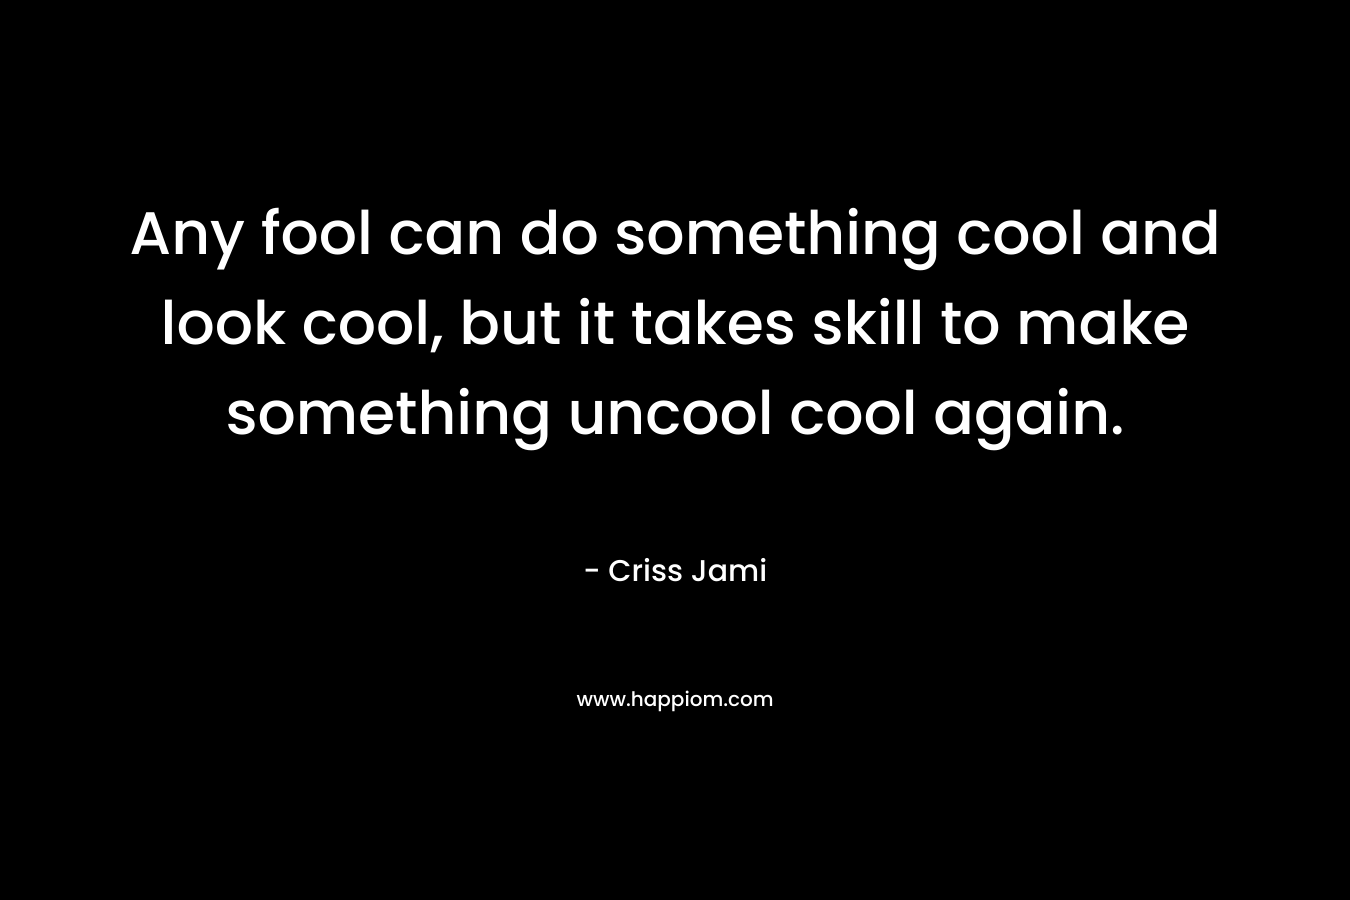 Any fool can do something cool and look cool, but it takes skill to make something uncool cool again. – Criss Jami